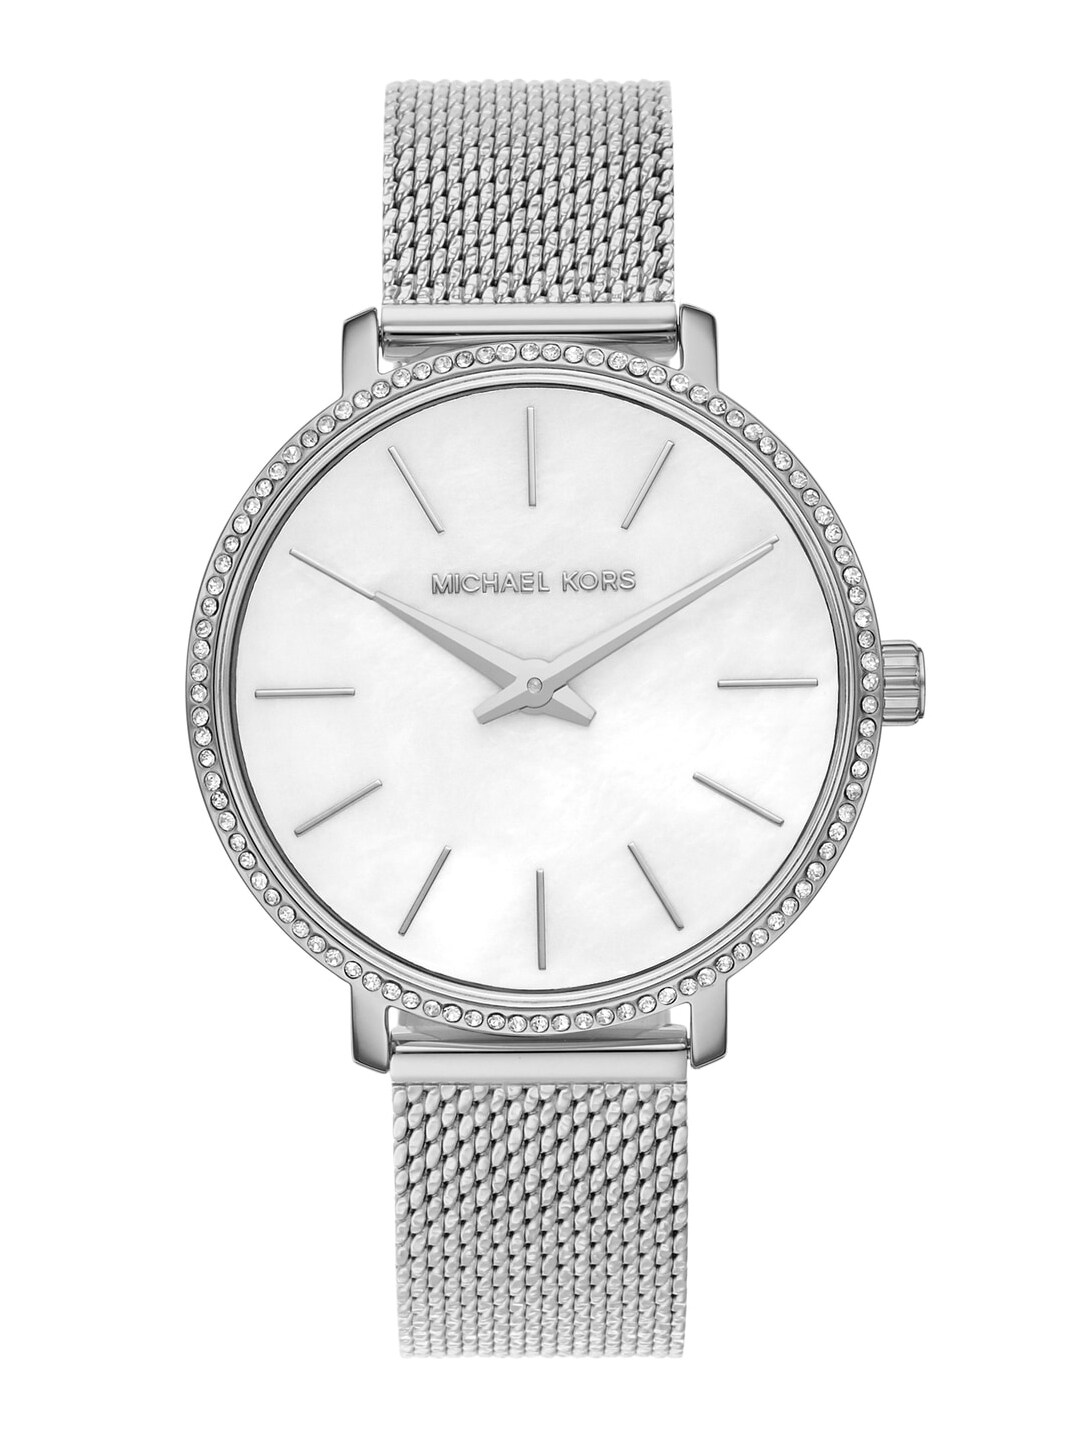 Michael Kors Women White Dial & Silver Toned Stainless Steel Straps Analogue Watch MK4618 Price in India